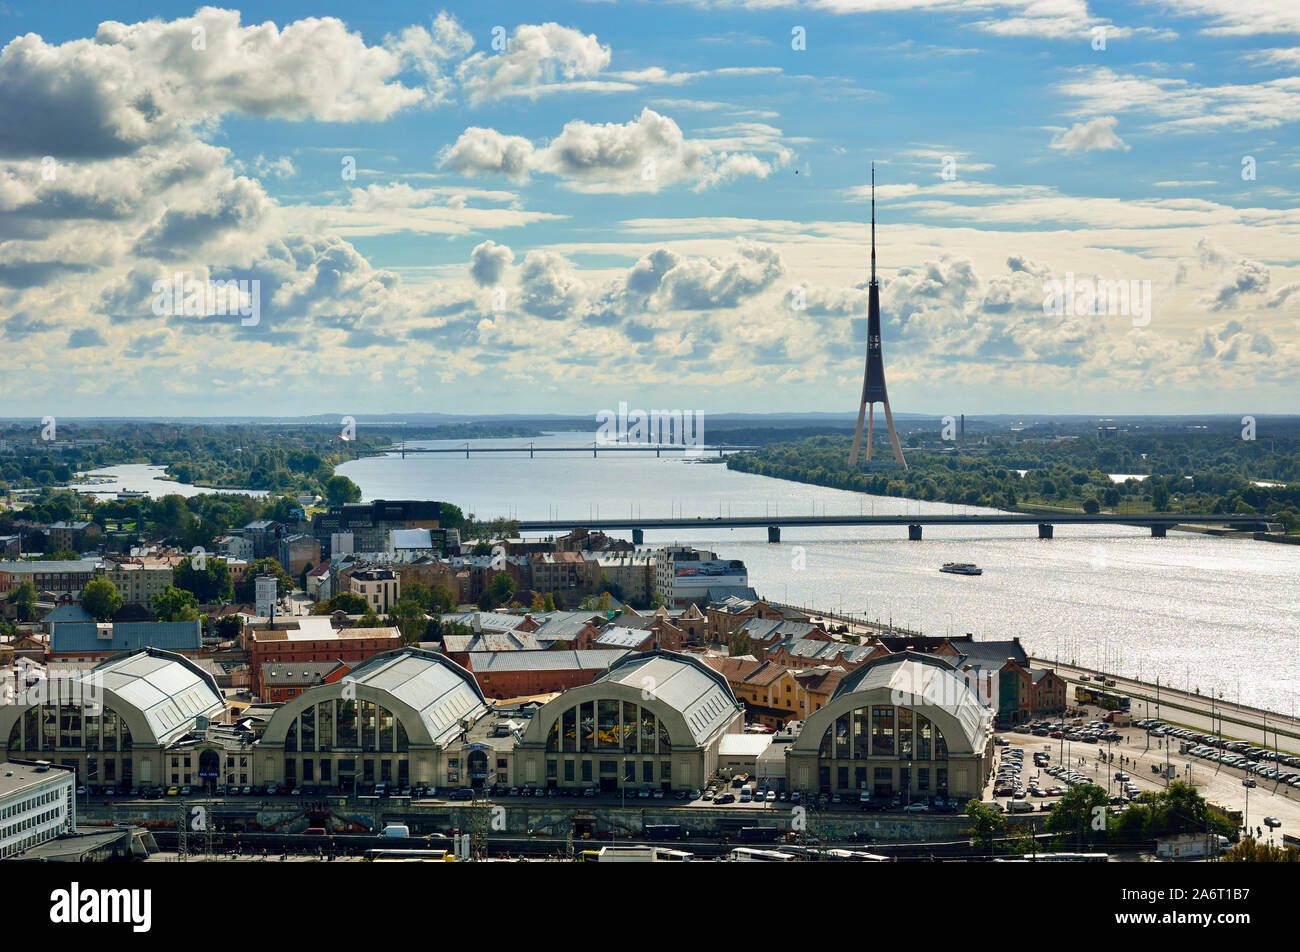 The television tower and the Daugava river. In the foreground, Riga Central Market (Centraltirgus) converted from Zeppelin hangars. Riga, Latvia Stock Photo